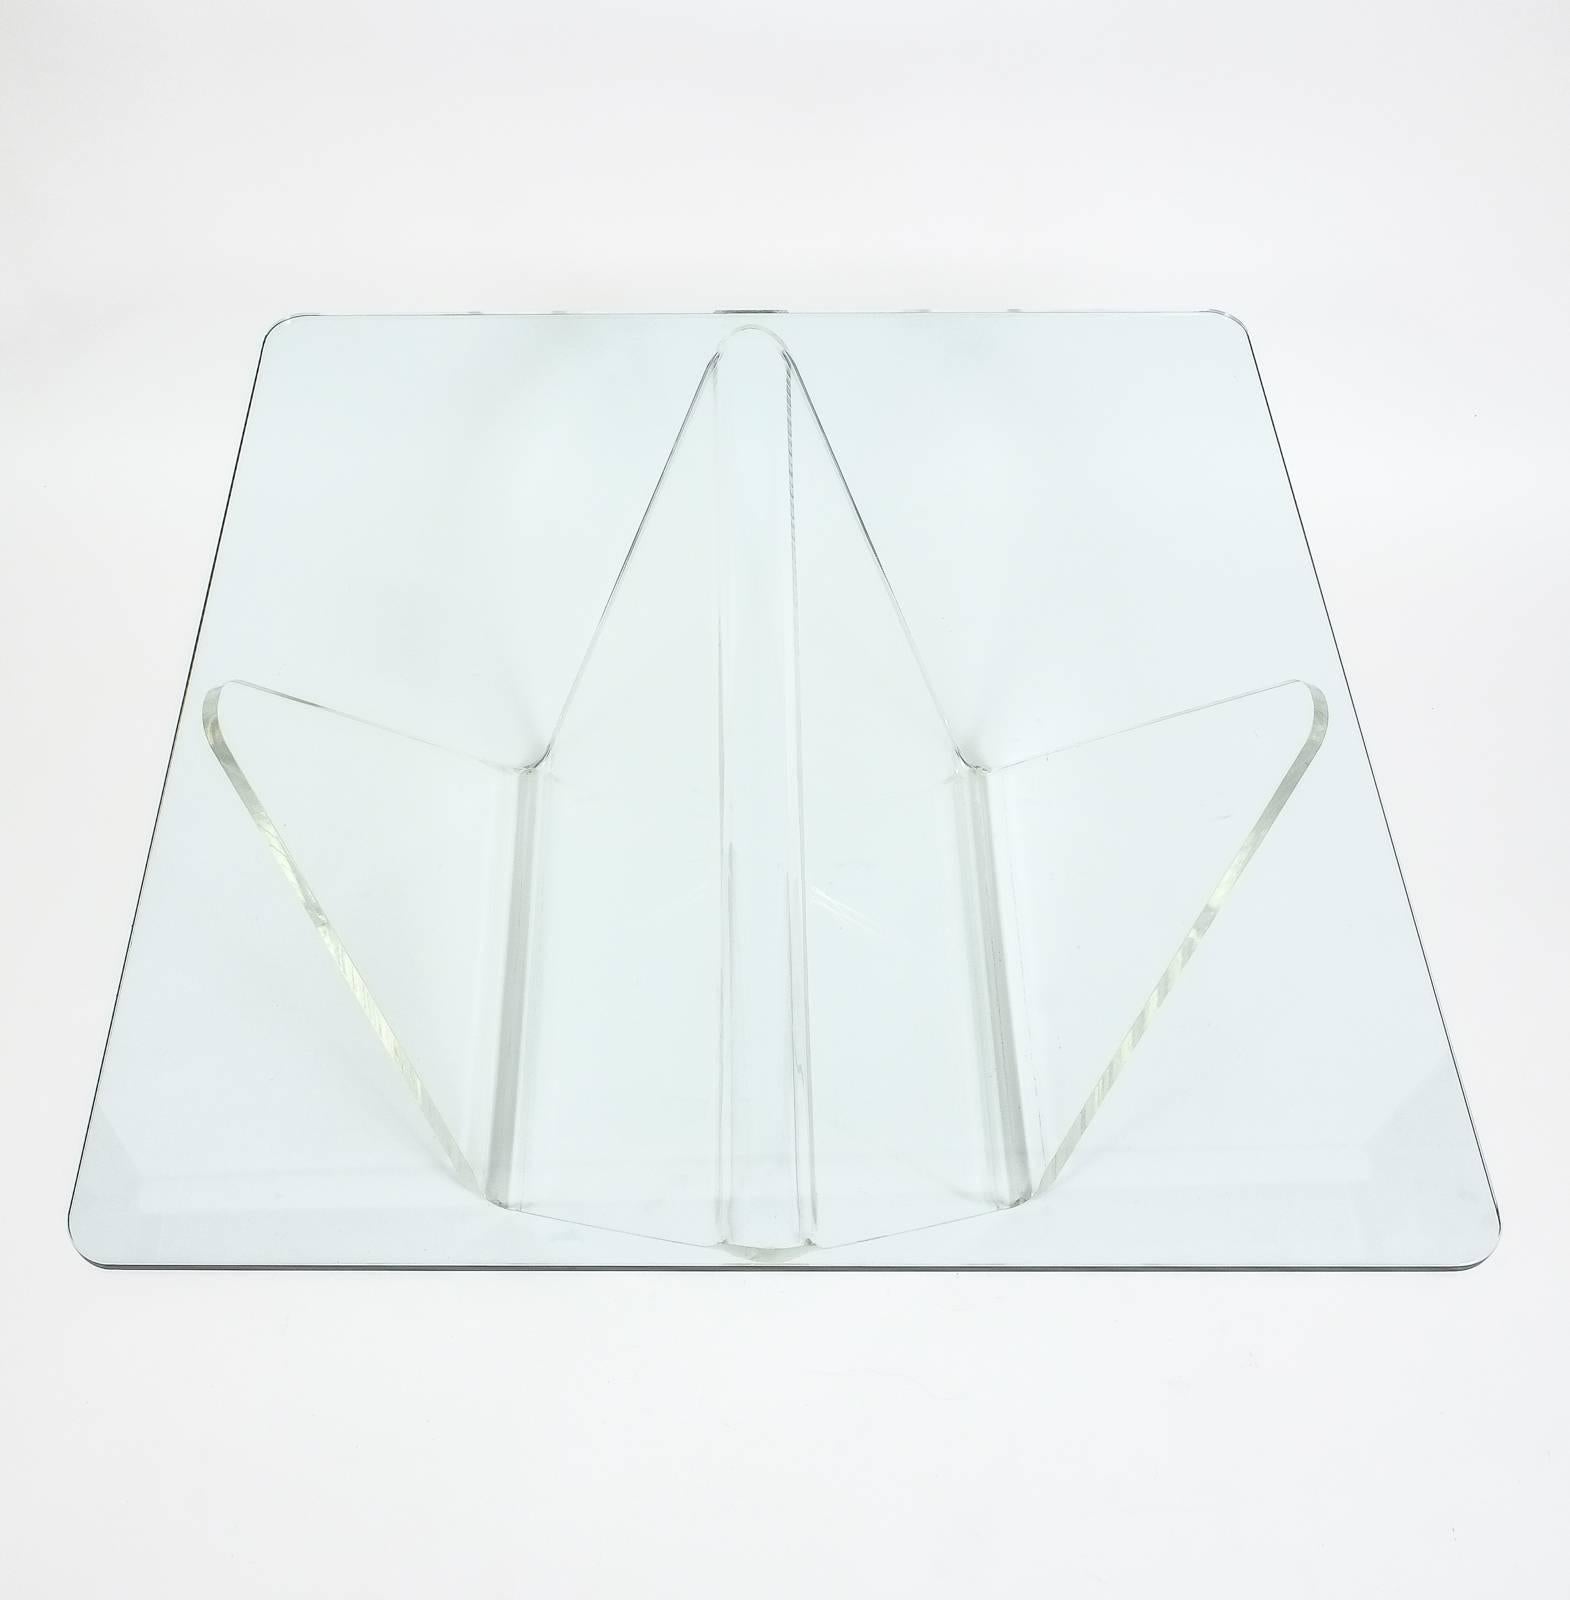 Giant Midcentury Lucite Magazine Rack or Easel, Germany circa 1960 For Sale 5